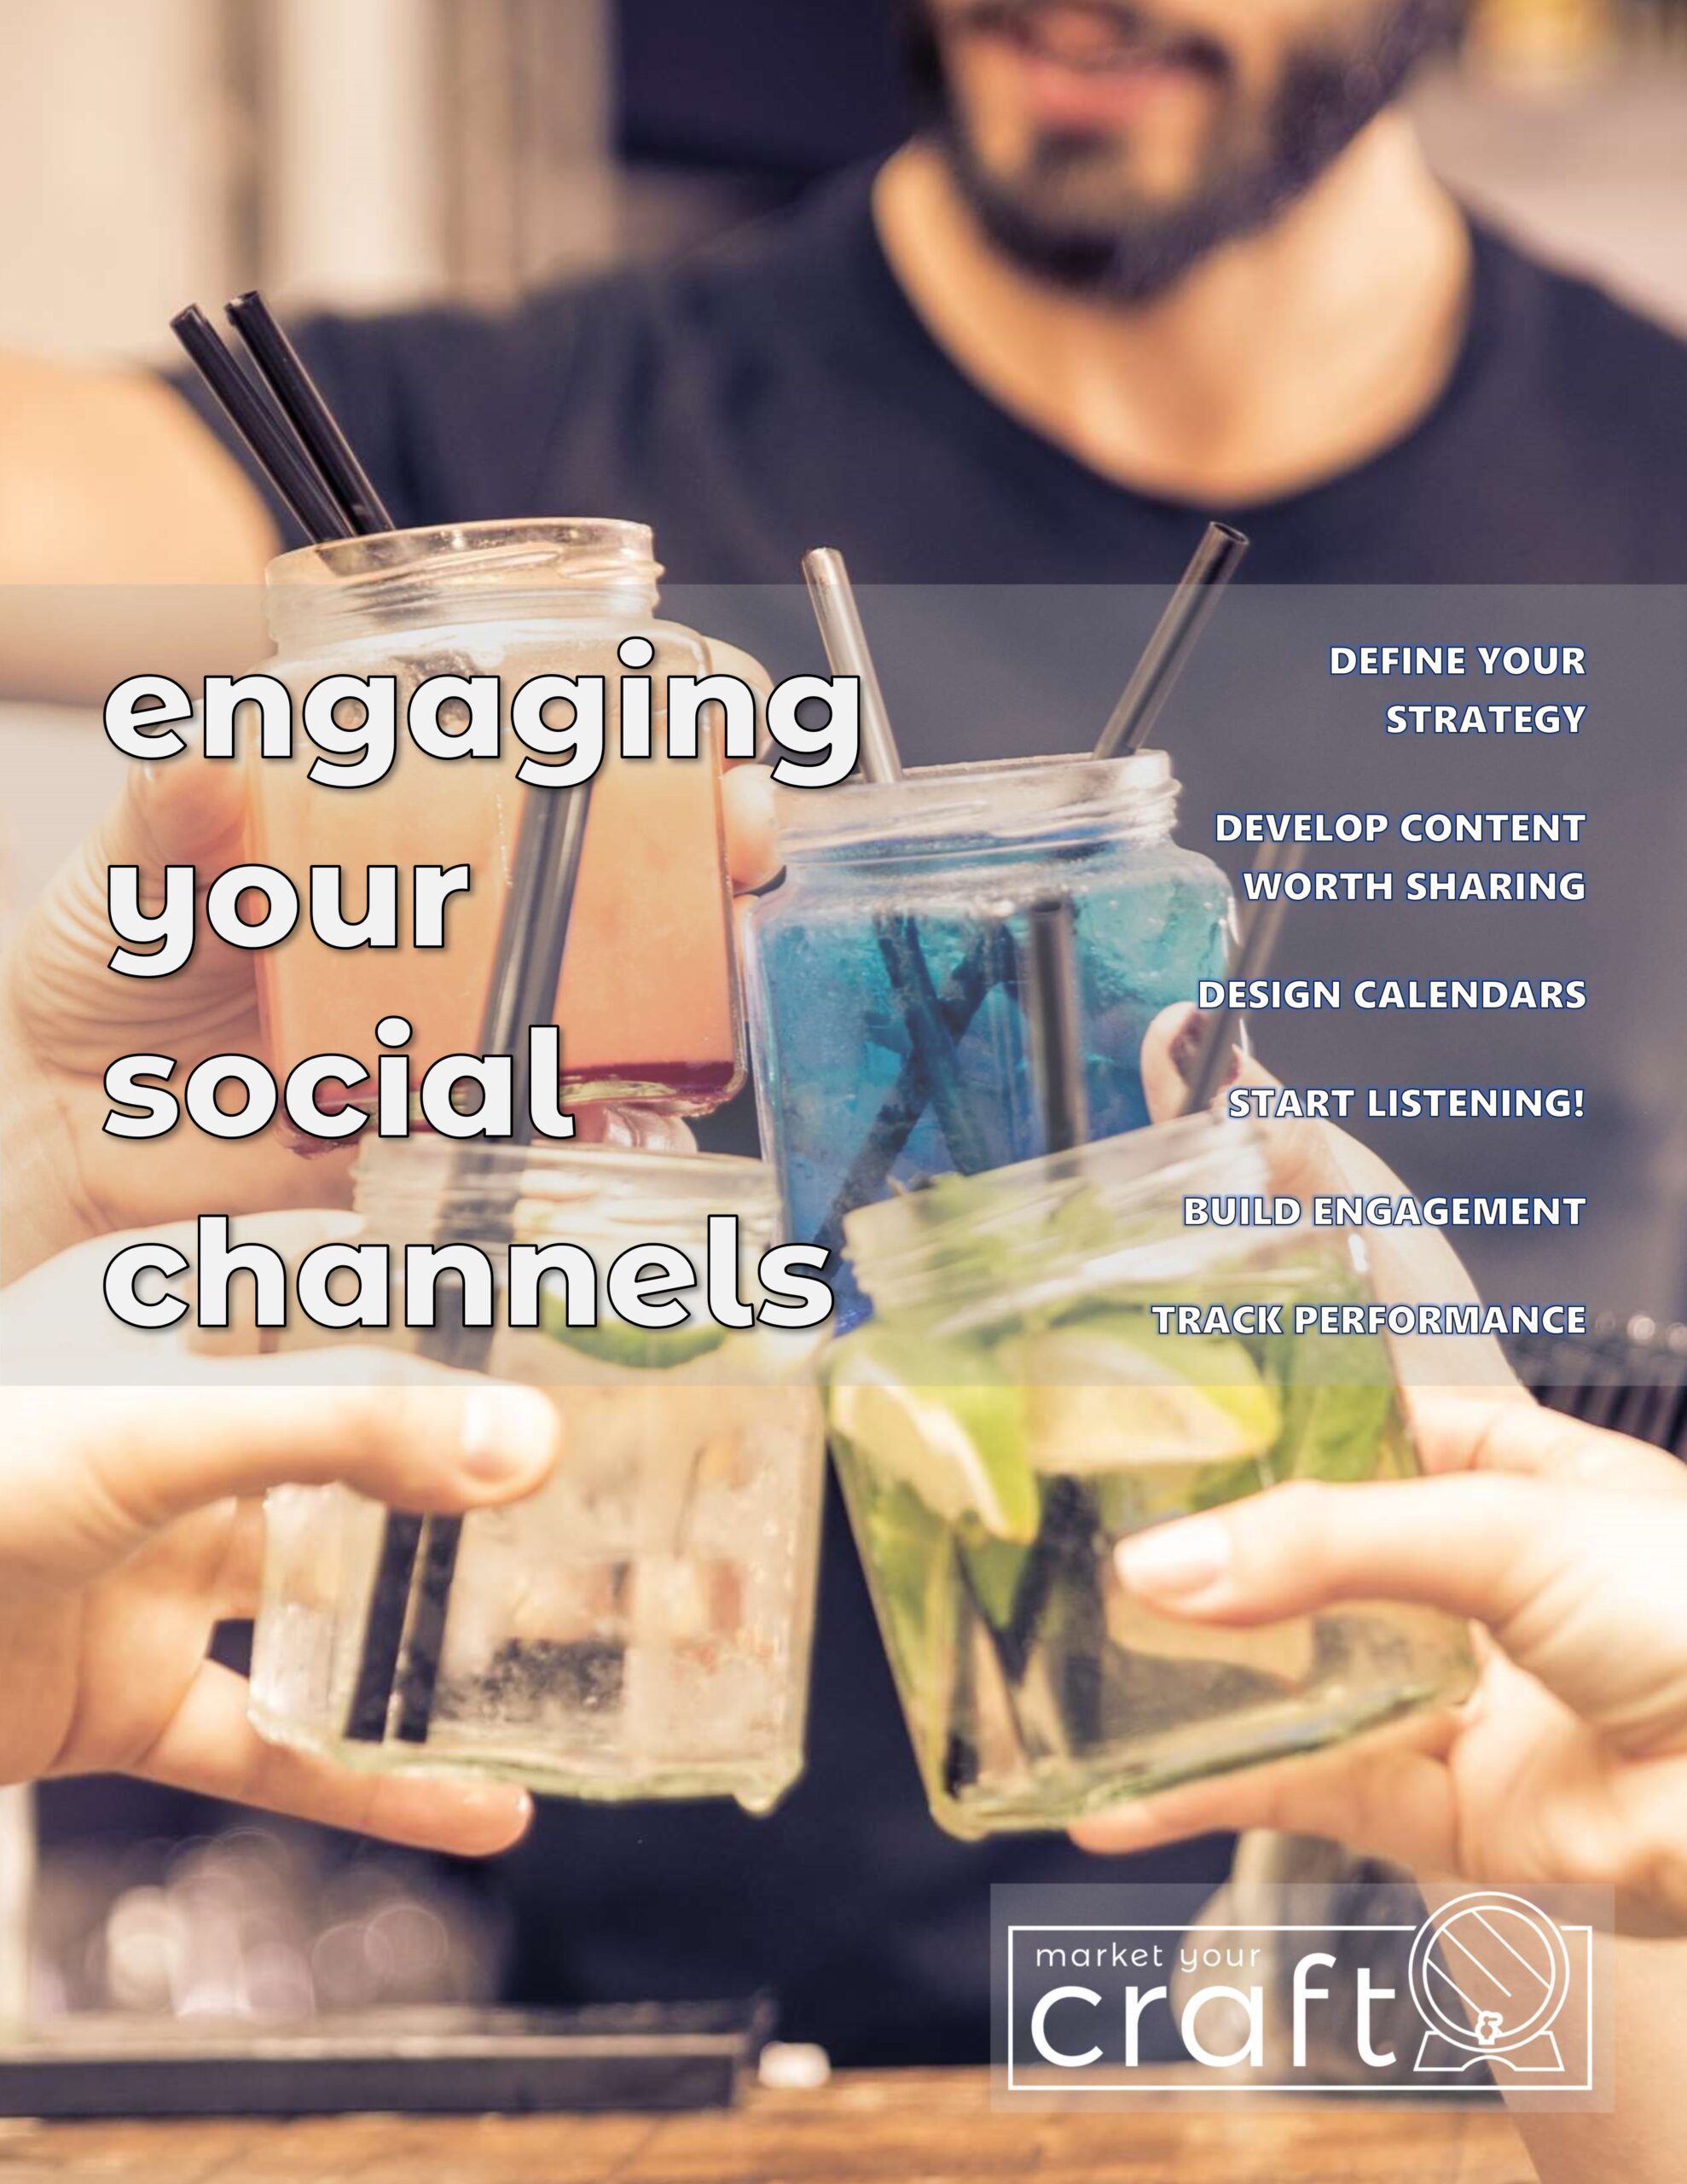 Engaging your Social Channels guide image